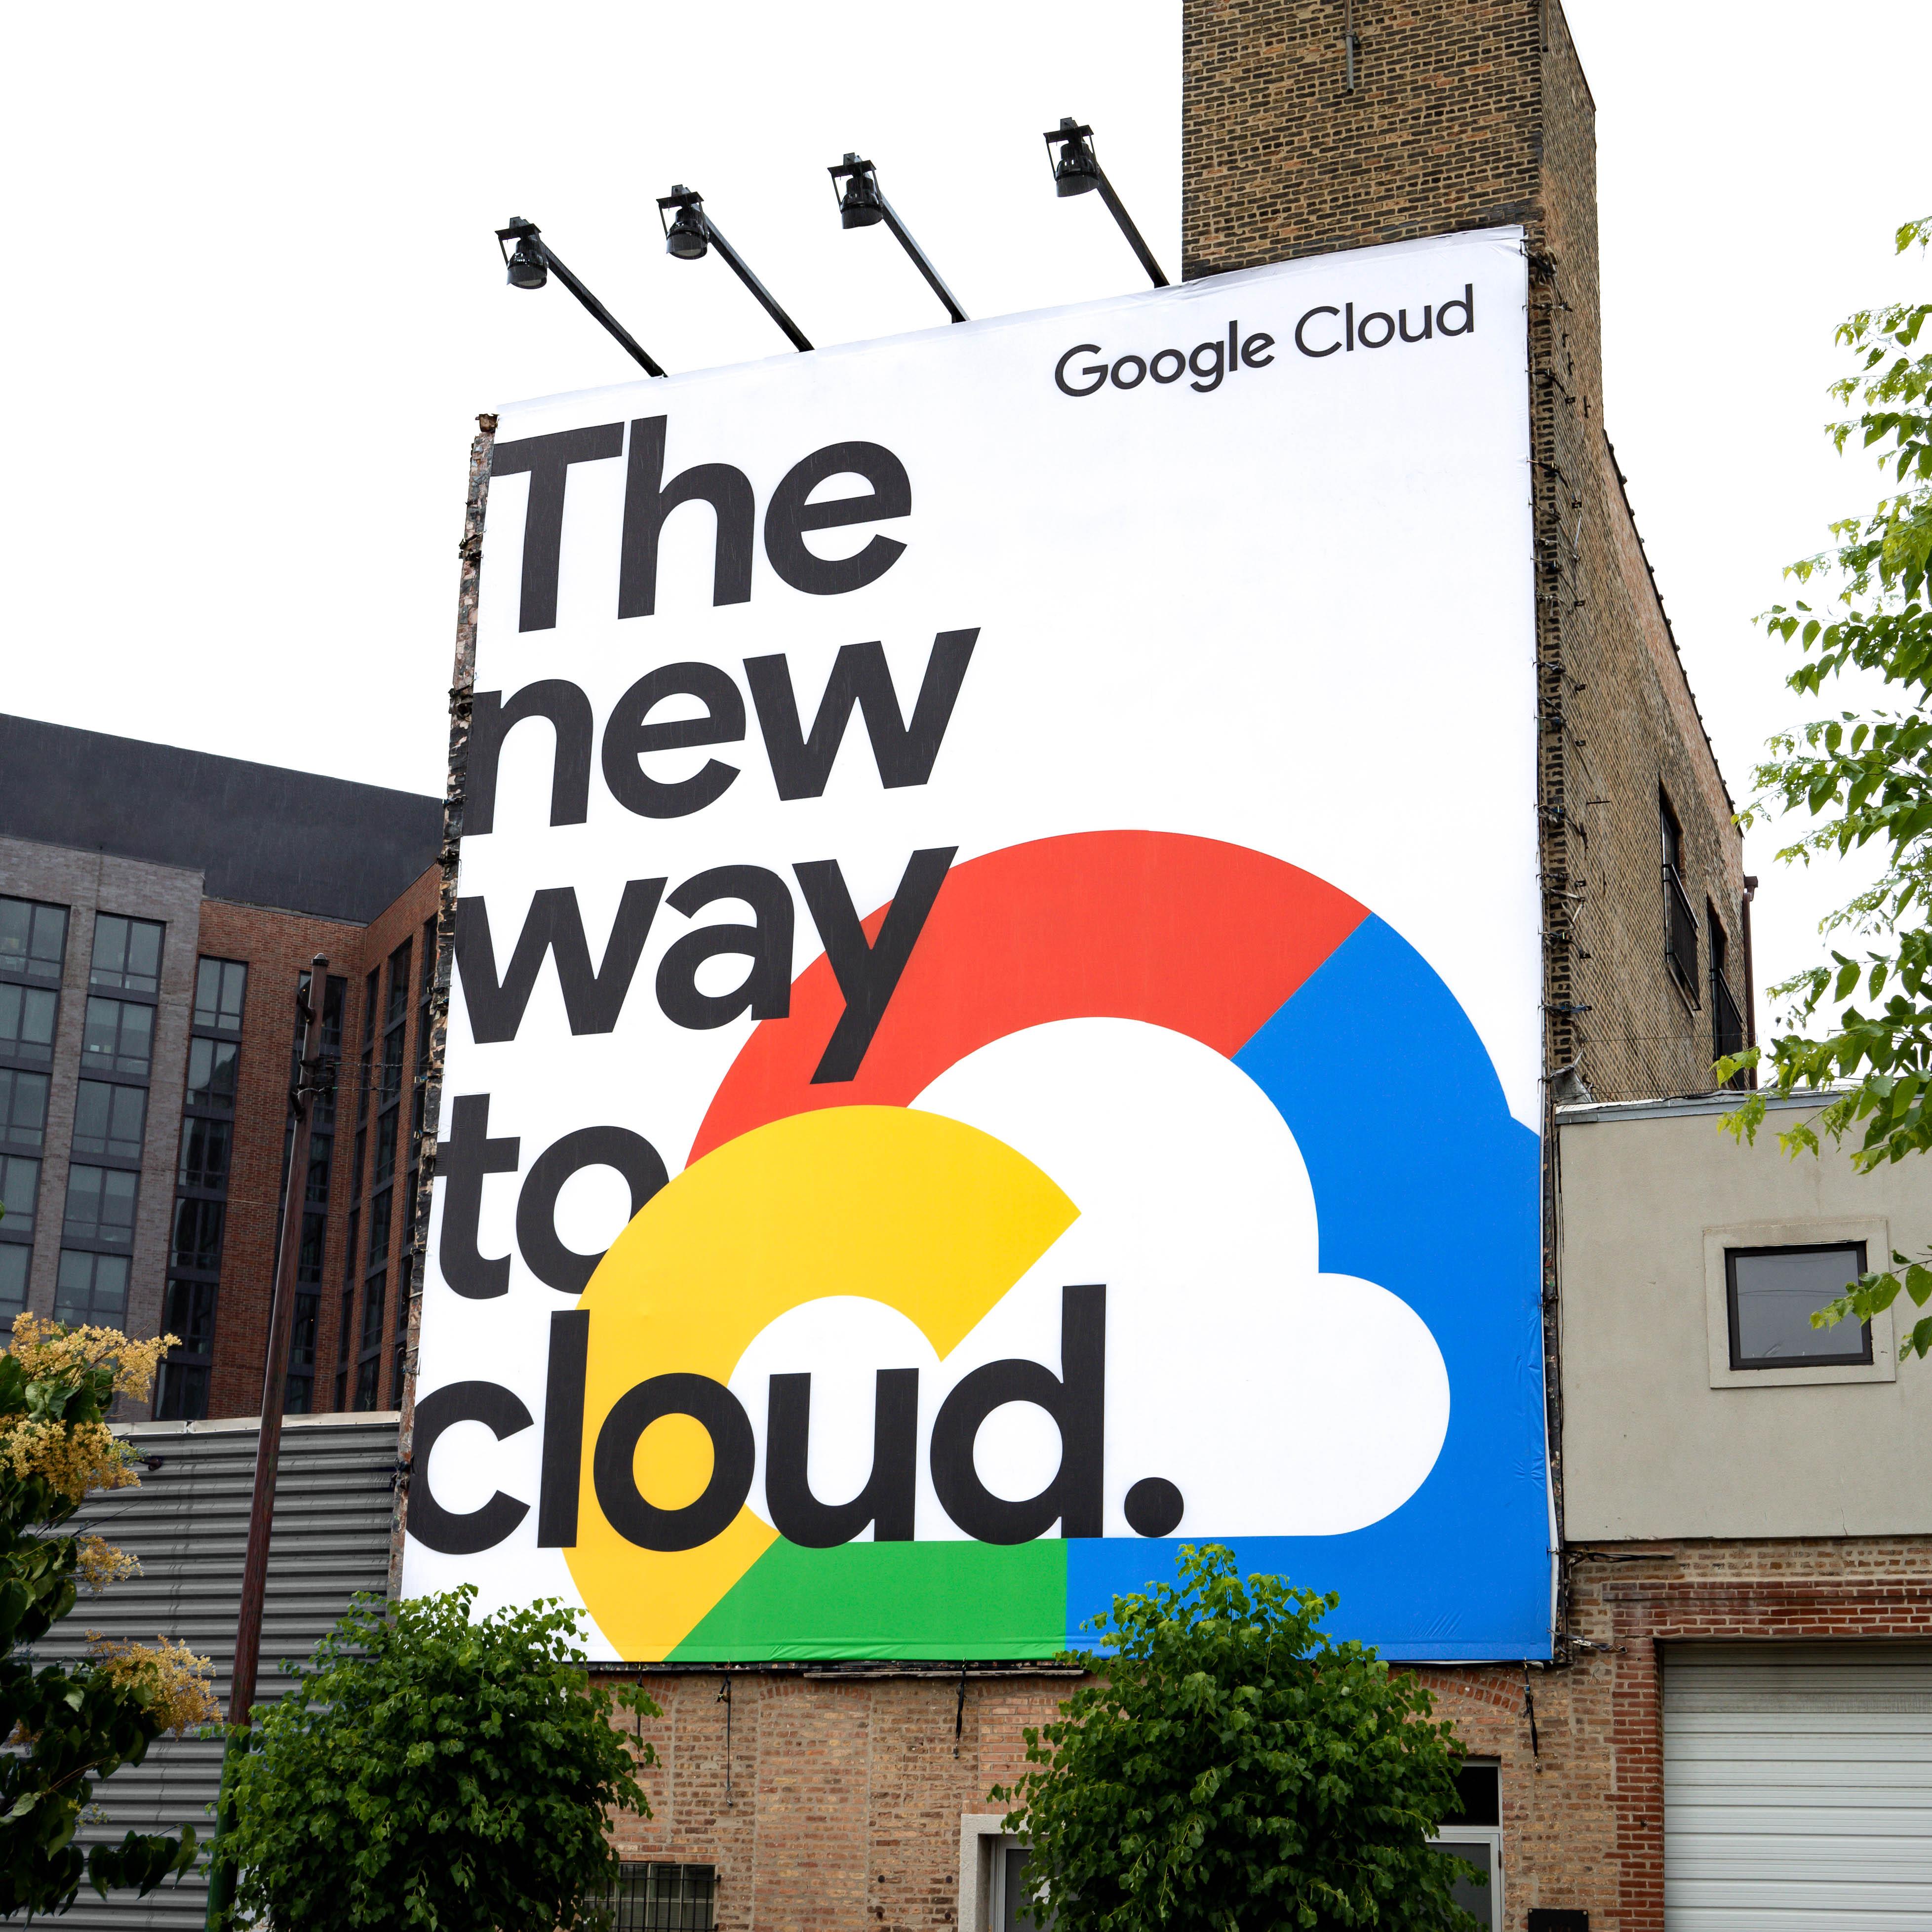 Google Cloud - The new way to cloud